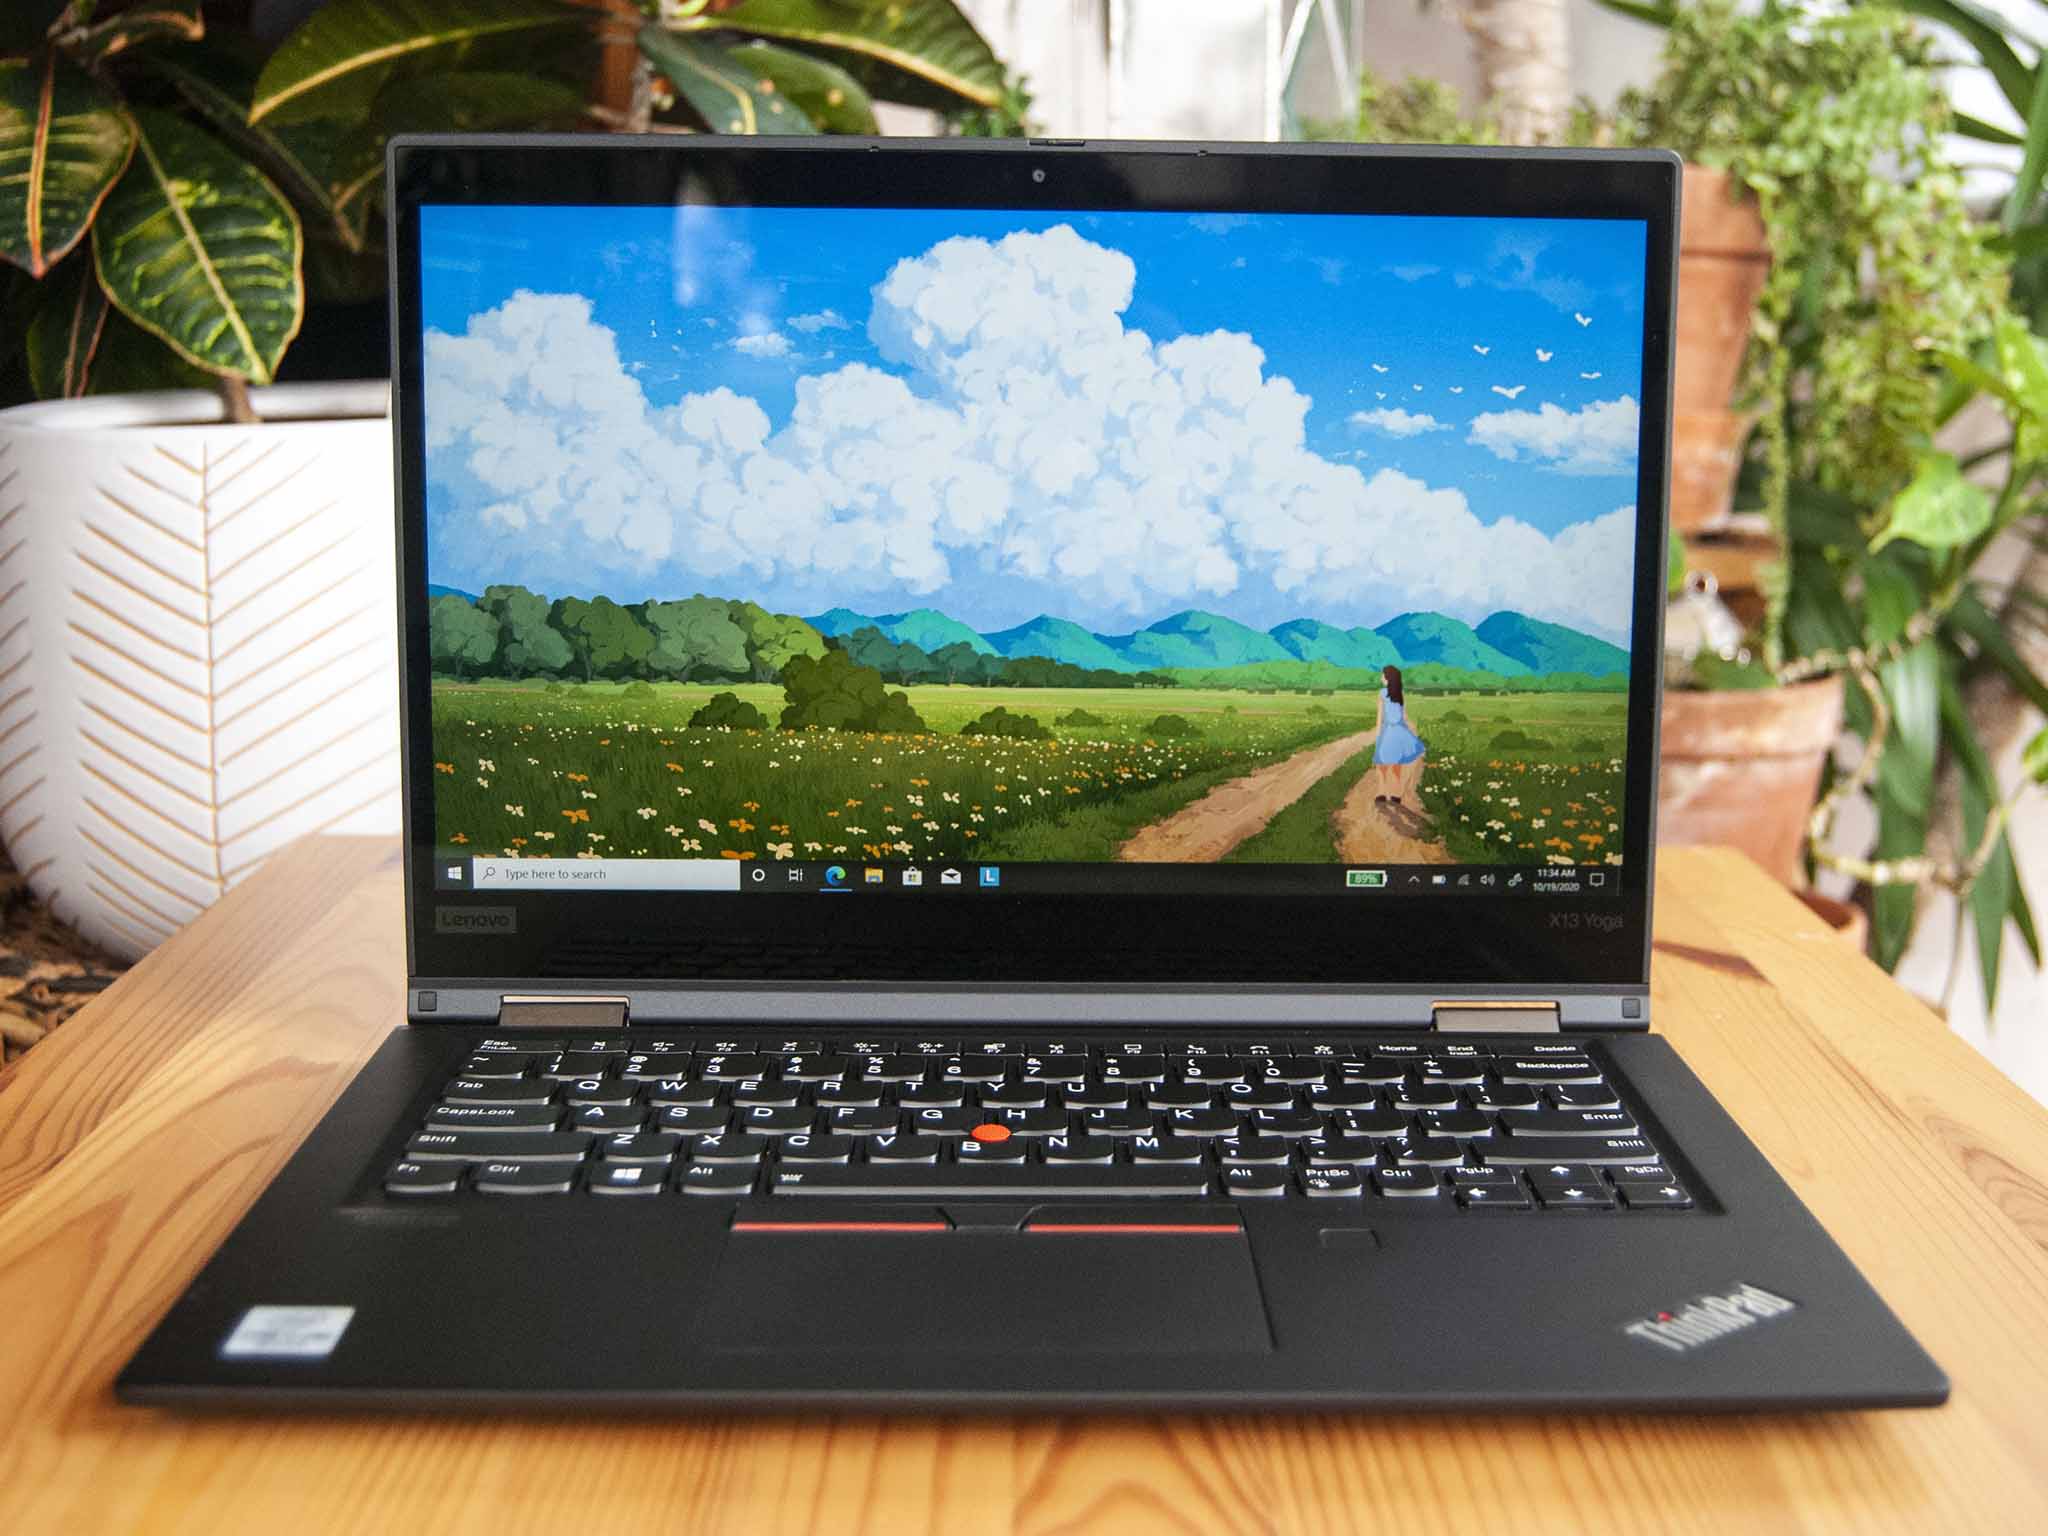 Lenovo ThinkPad X13 Yoga review: Not much new in the successor to the